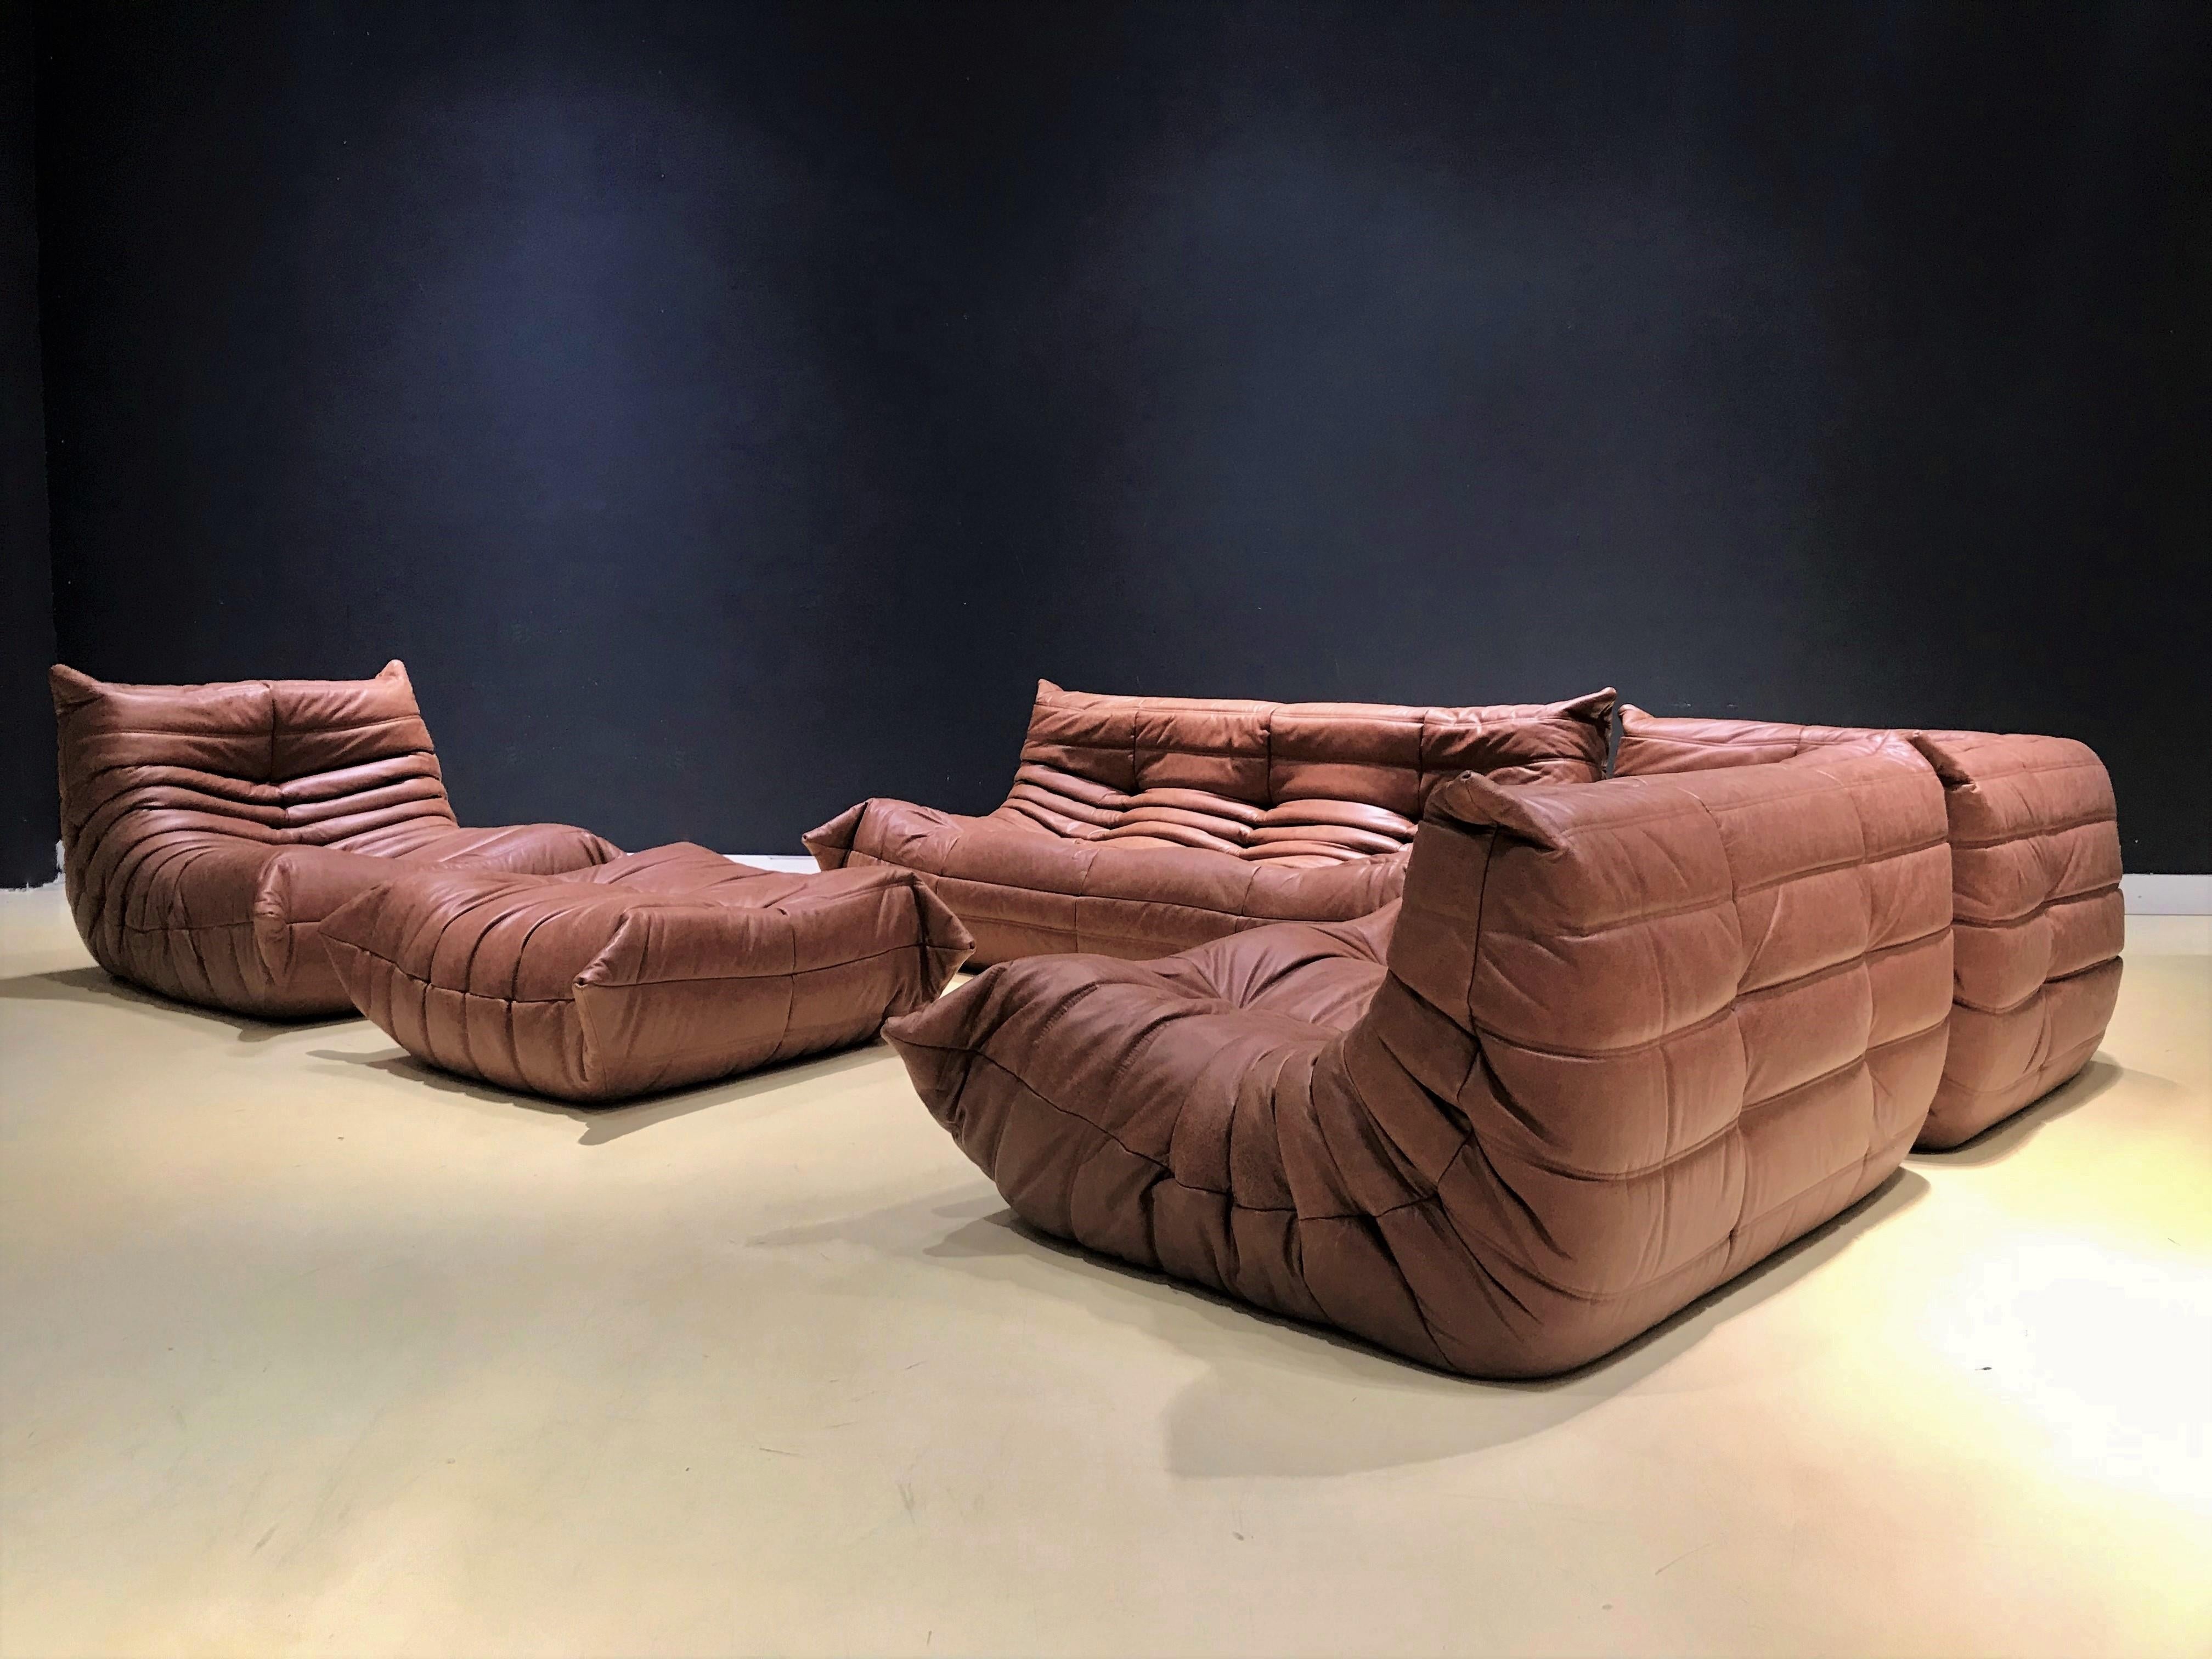 The Togo was designed in 1973 by Michel Ducaroy for Ligne Roset in France. 1.4 Million Togo’s have been sold since, therefore it is the most sold designer sofa in the world. This living room set is refurbished. Old weak parts of foam have been